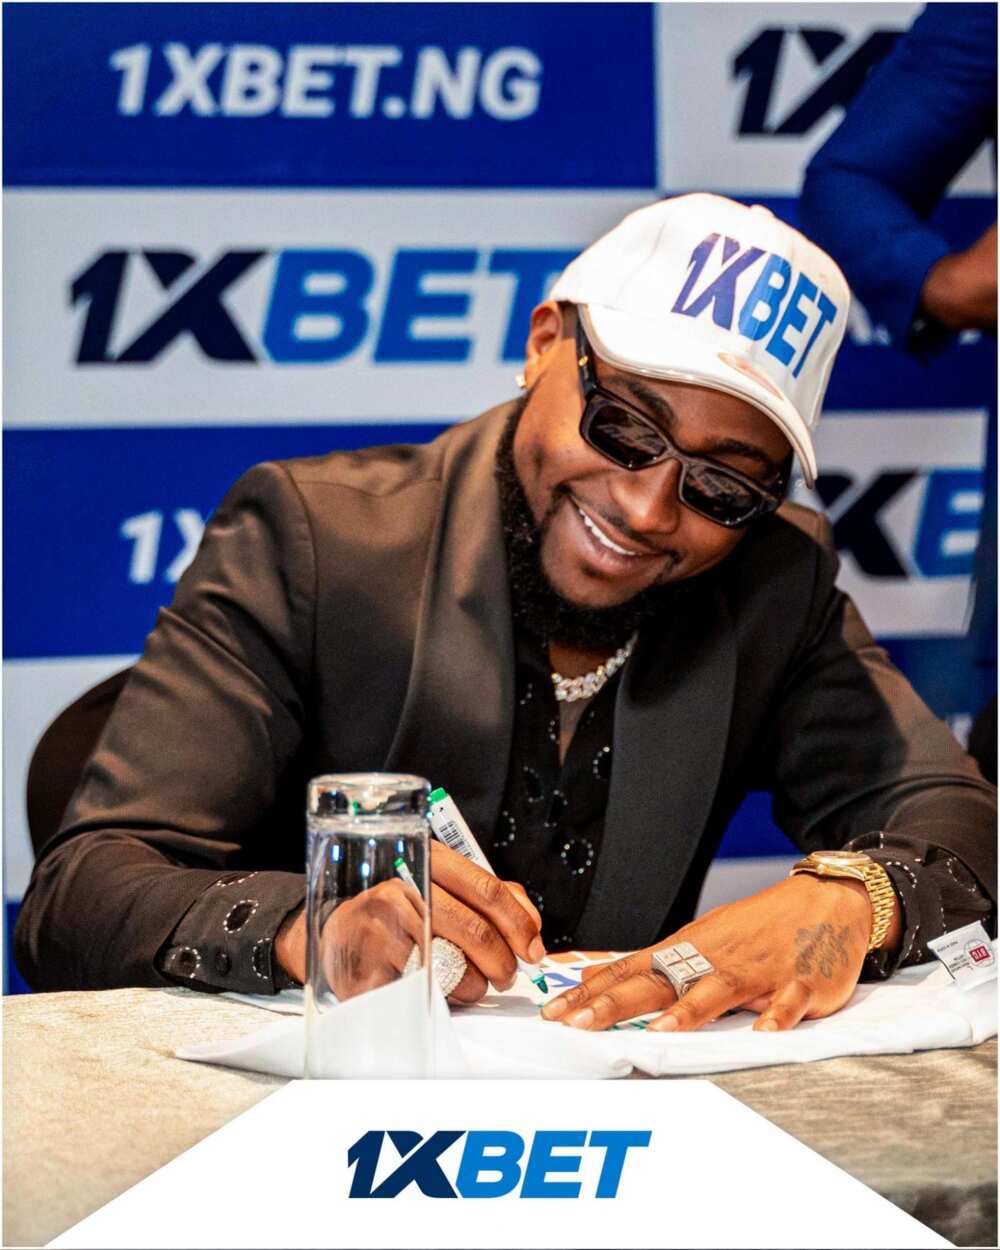 1xBet Announces Davido as the Newest Brand Ambassador in Africa